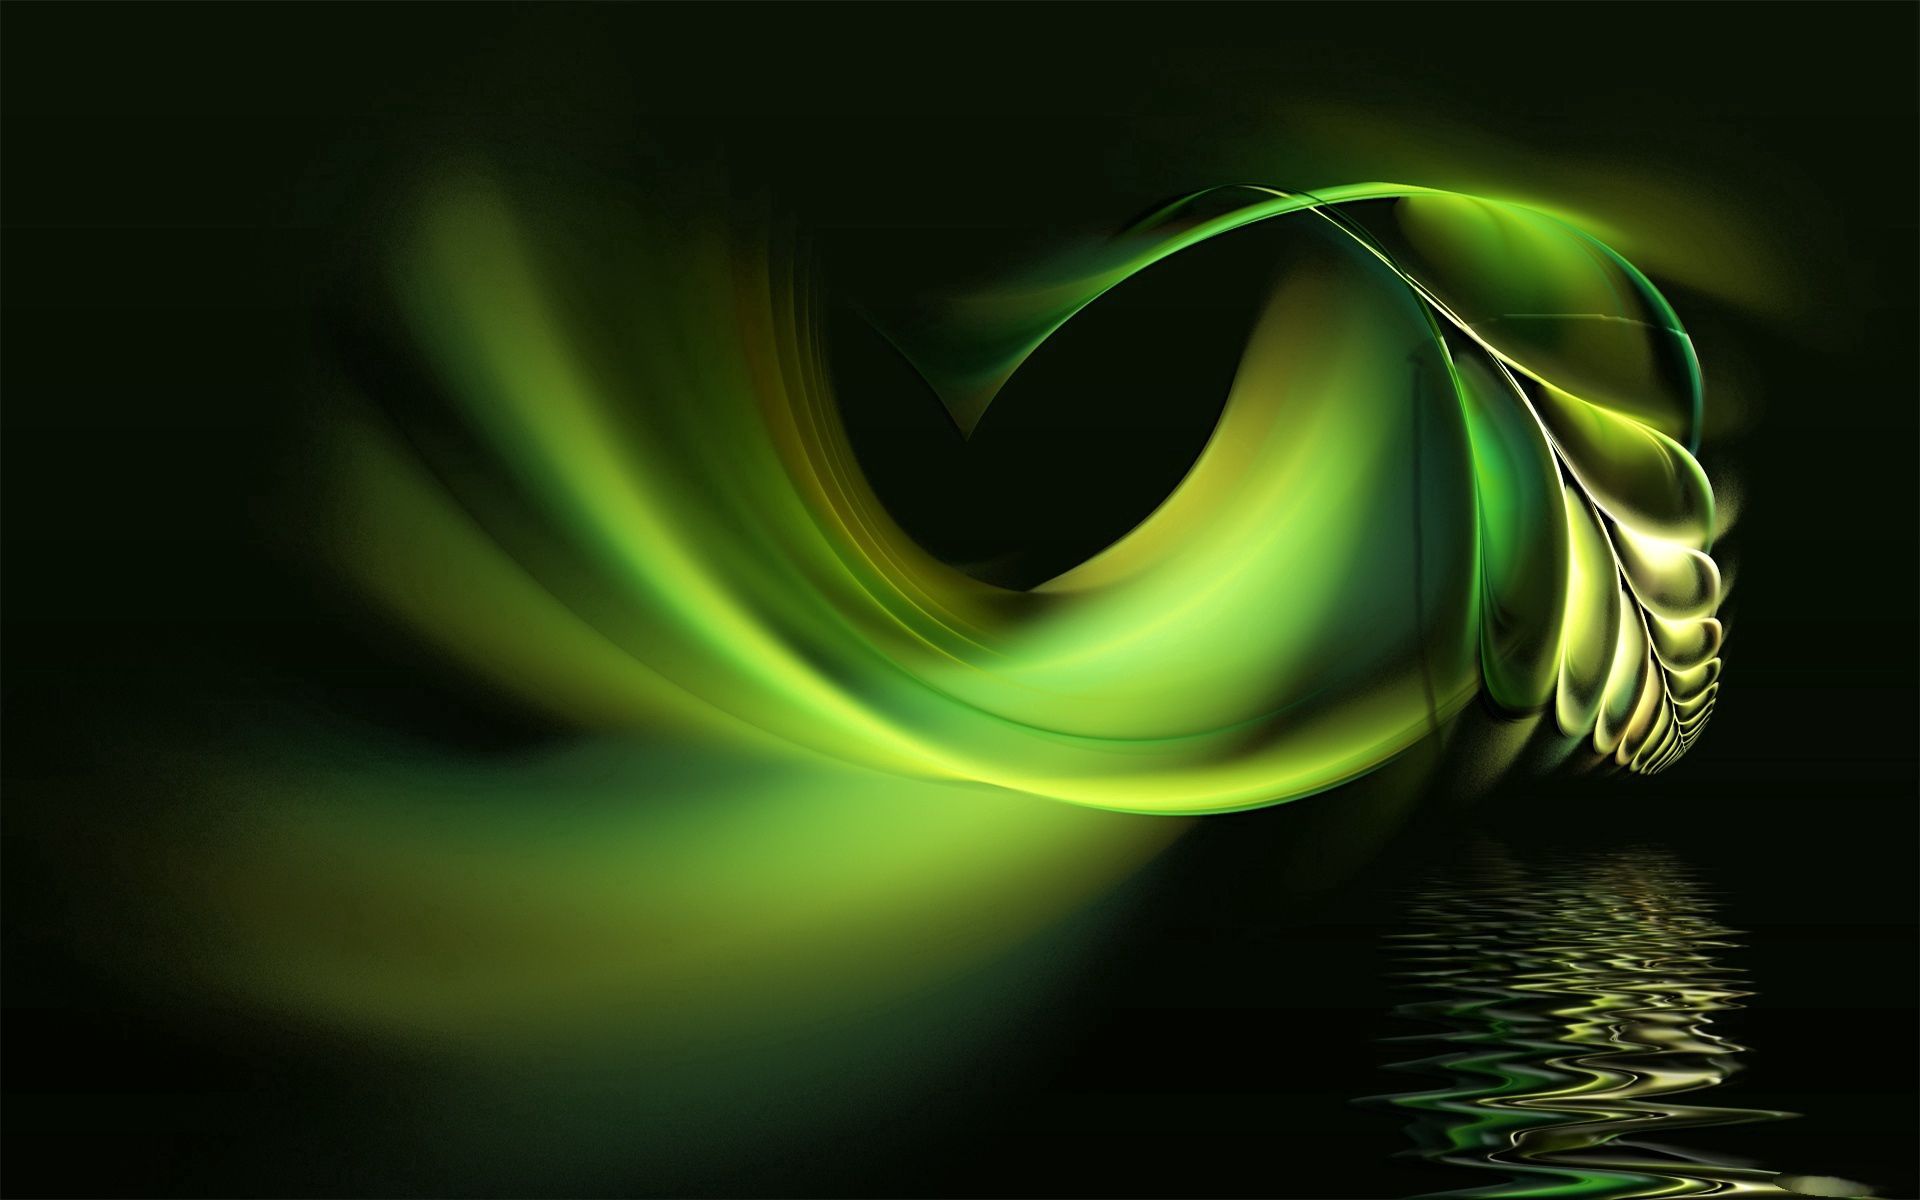 74805 download wallpaper black, green, background, abstract, water, feather, pen screensavers and pictures for free